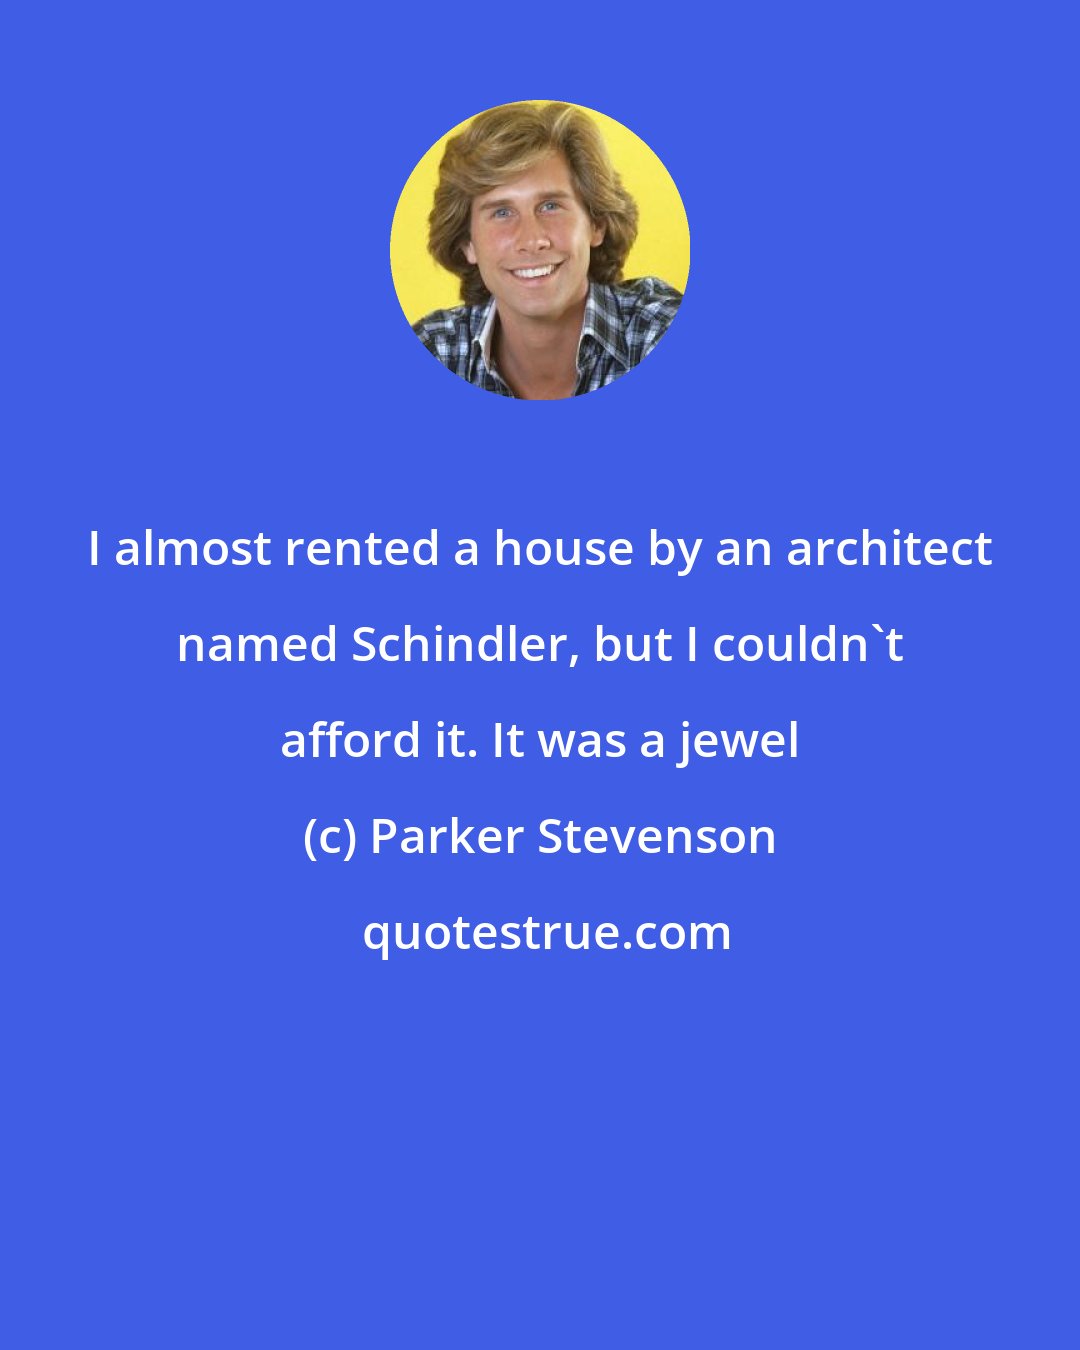 Parker Stevenson: I almost rented a house by an architect named Schindler, but I couldn't afford it. It was a jewel